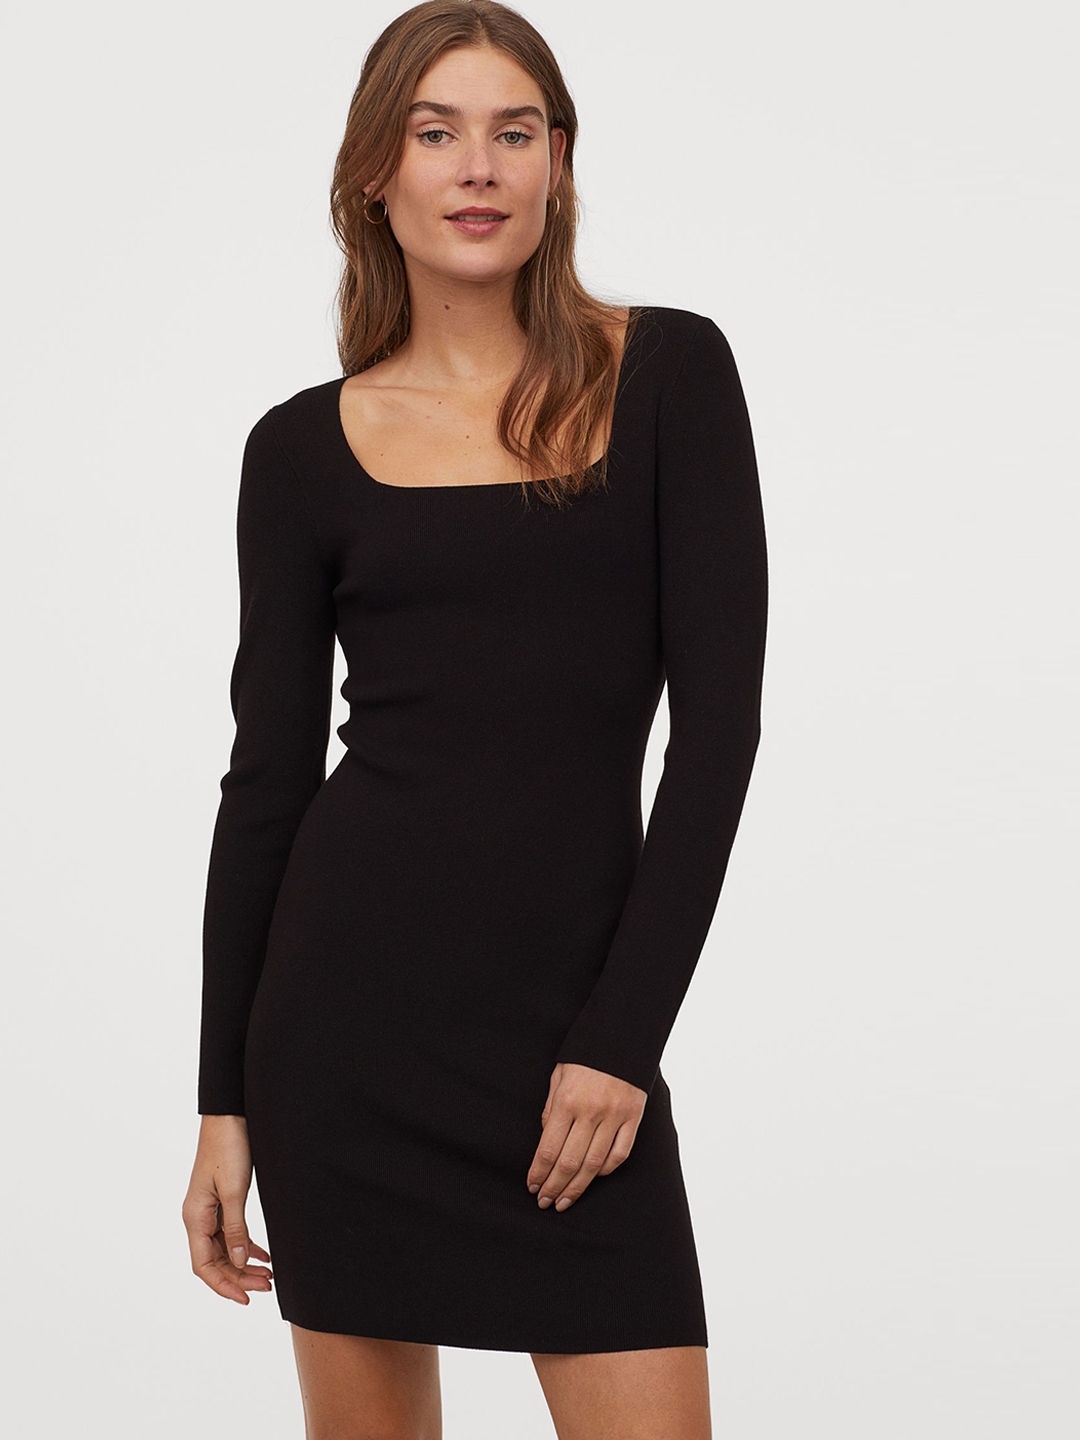 Buy H&M Women Black Solid Fitted Dress - Dresses for Women 11144444 ...